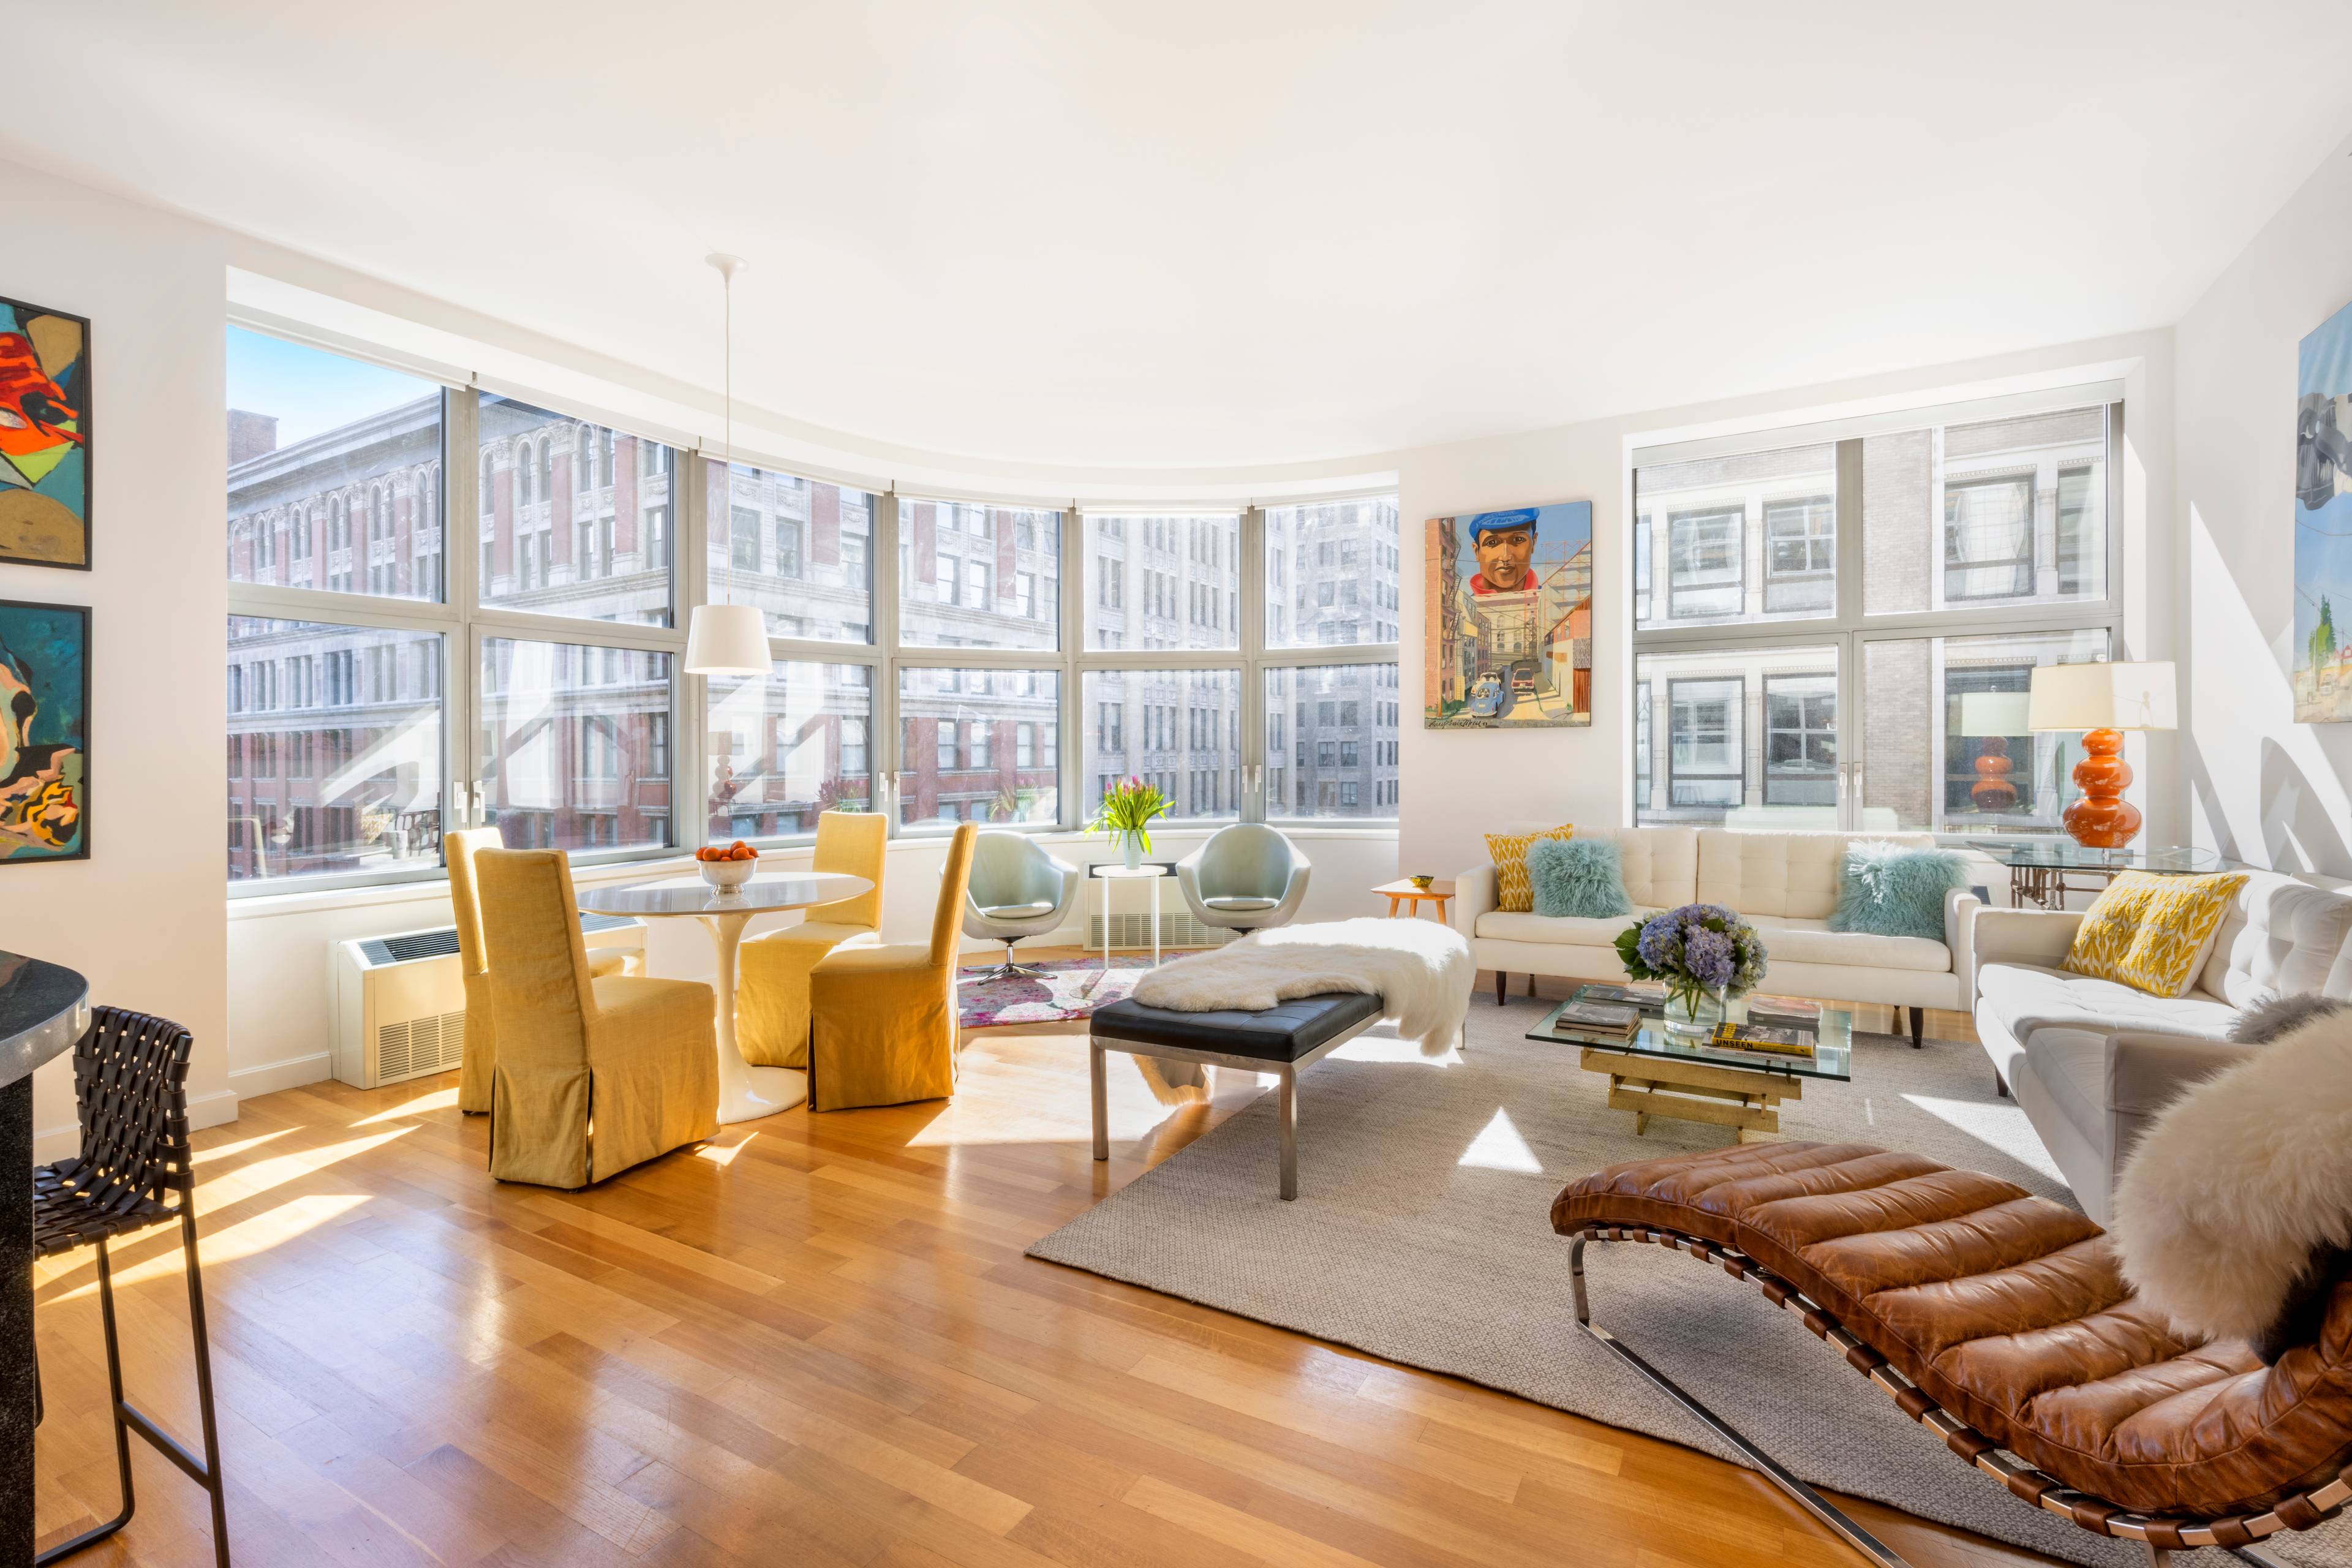 LEASE OUT. Large, sunny, beautifully appointed 2 bedroom, 2 bathroom corner apartment overlooking Park Avenue South, with Southern and Eastern exposures allowing for excellent light all day.